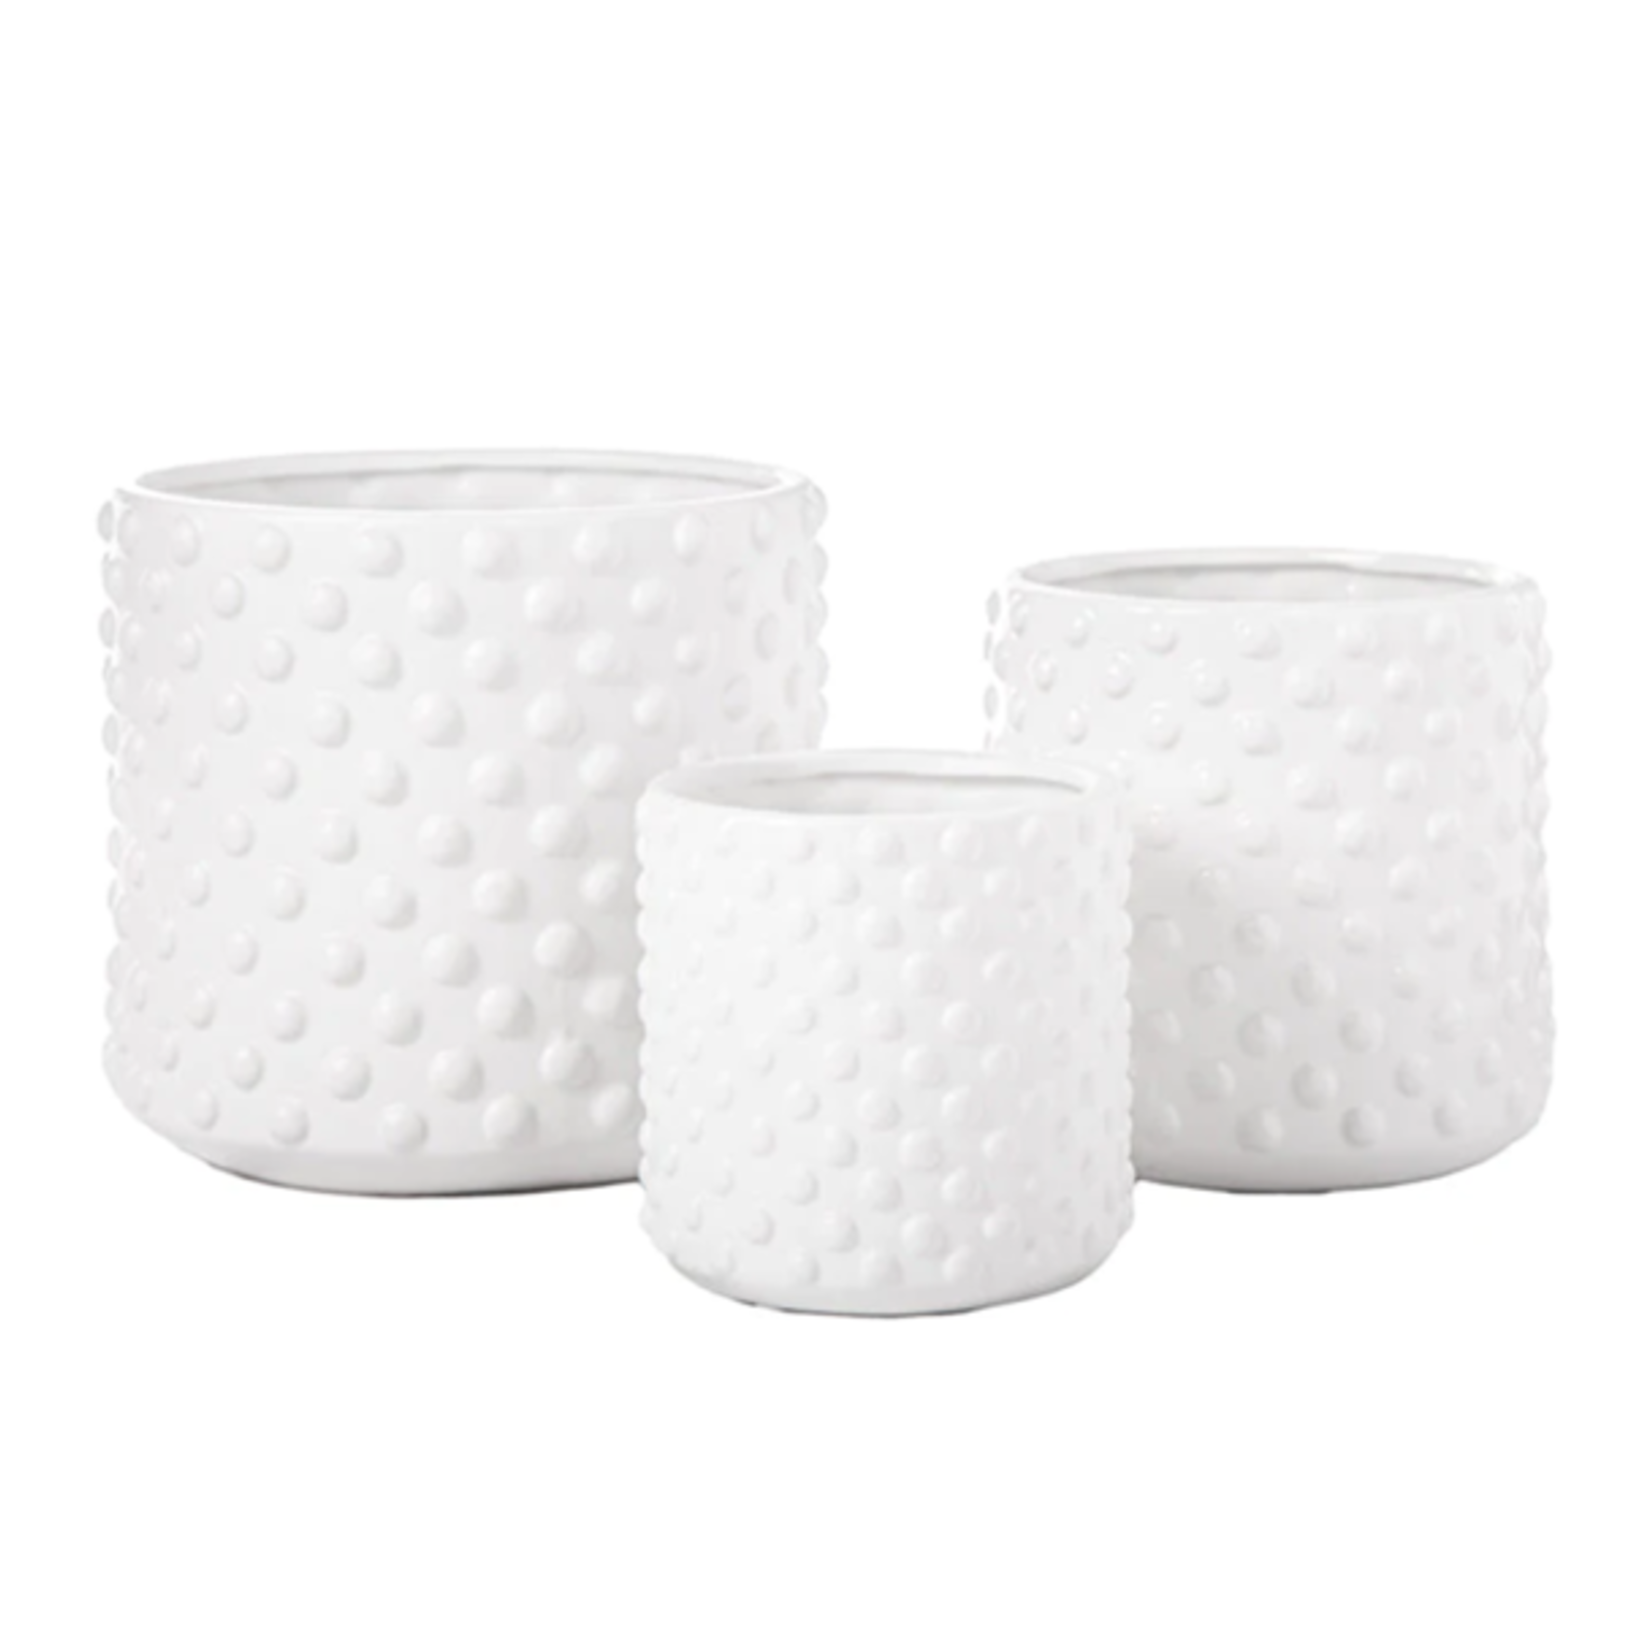 7.5” X 8” LARGE Matte White Round Ceramic Pot with Embossed Dotted Pattern Design Body